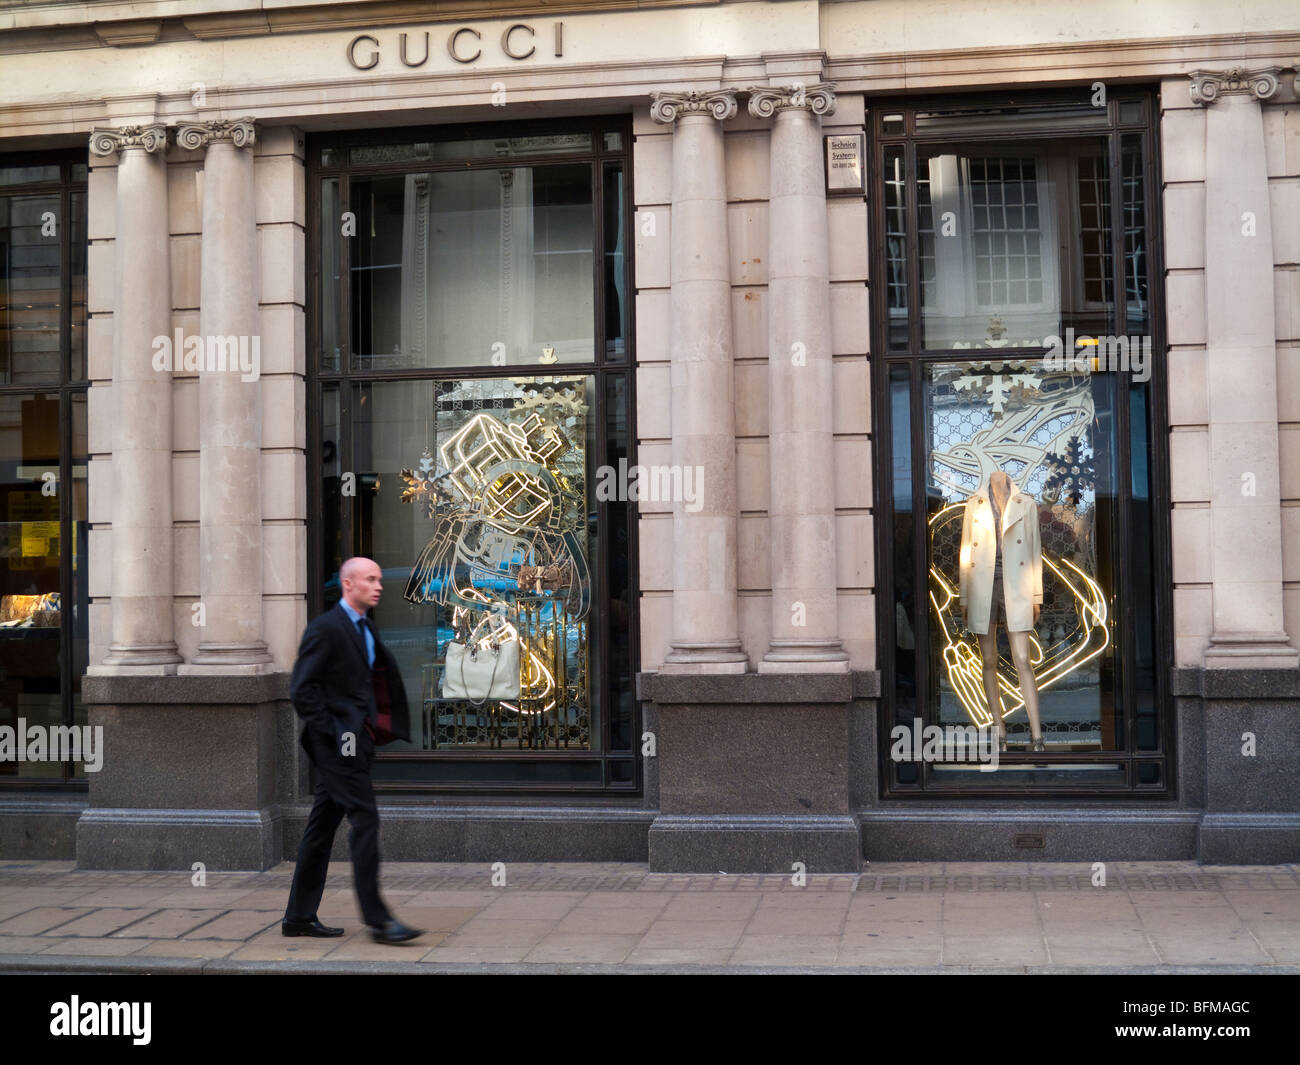 Gucci London High Resolution Stock Photography and Images - Alamy